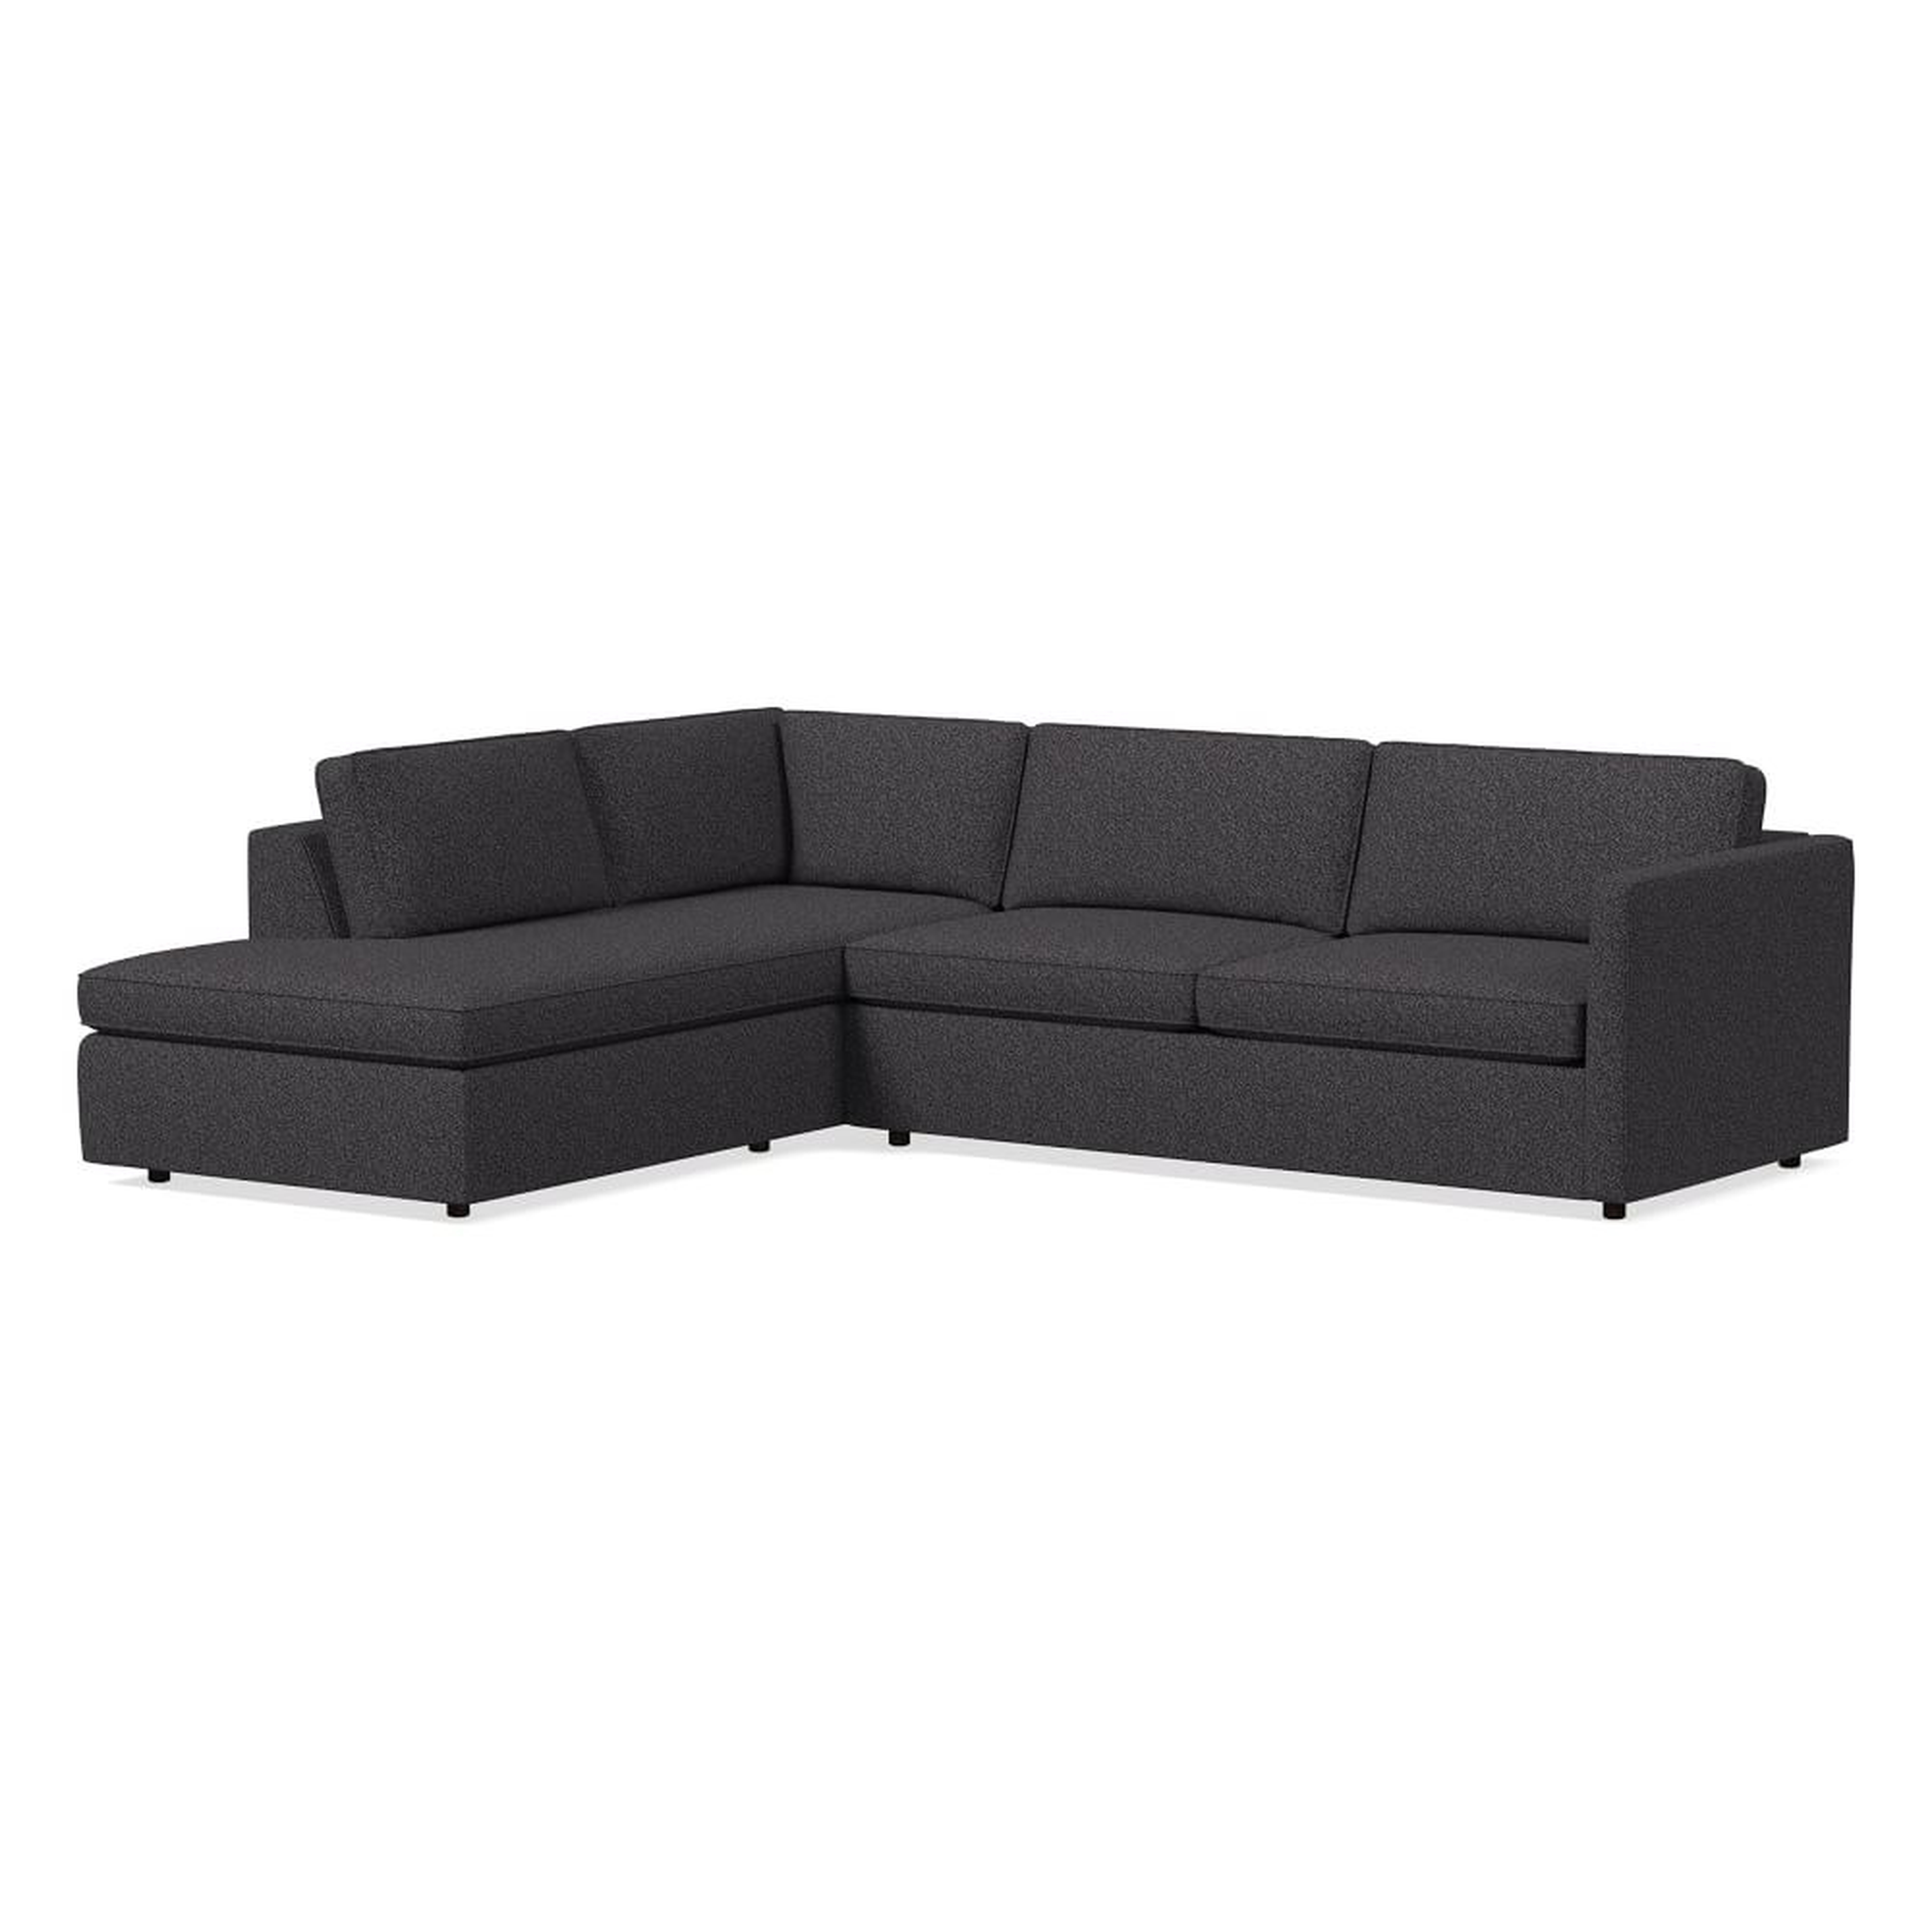 Harris Sectional Set 02: Right Arm Sleeper Sofa, Left Arm Terminal Chaise, Poly, Luxe Boucle, Black/White, - West Elm